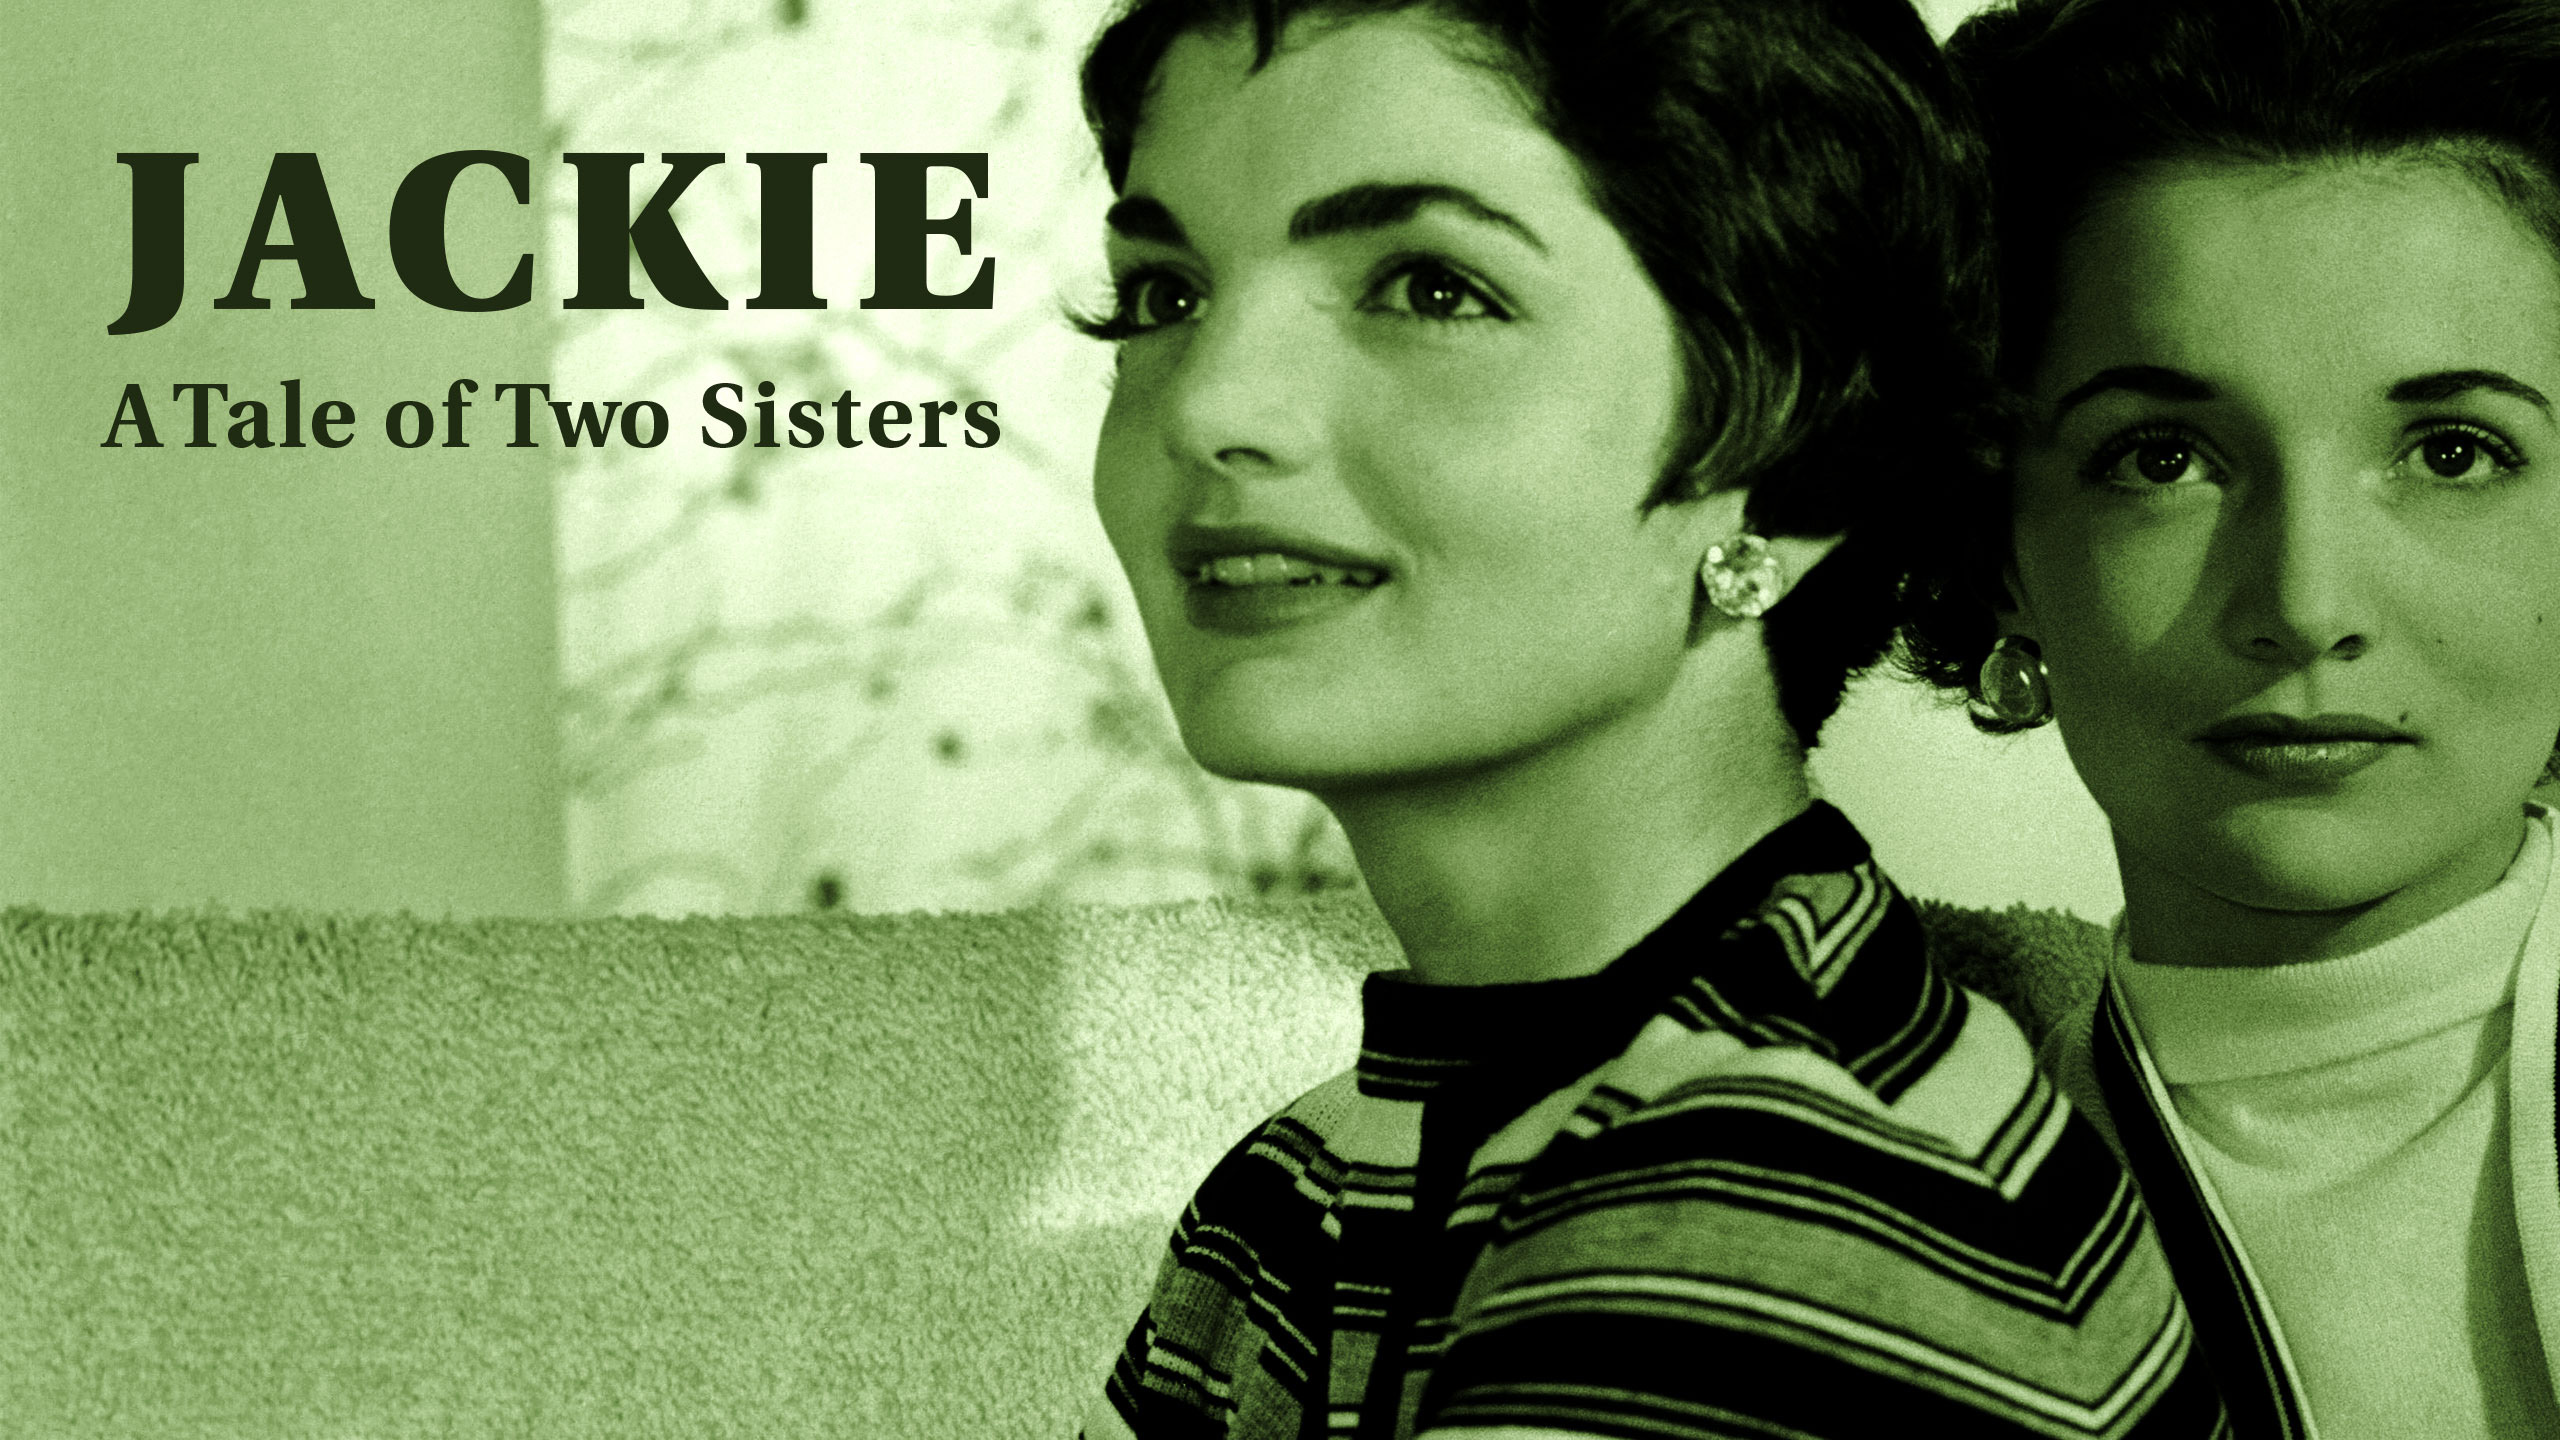 Included in the KENNEDY PACKAGE is "Jackie - A Tale of Two SIsters"